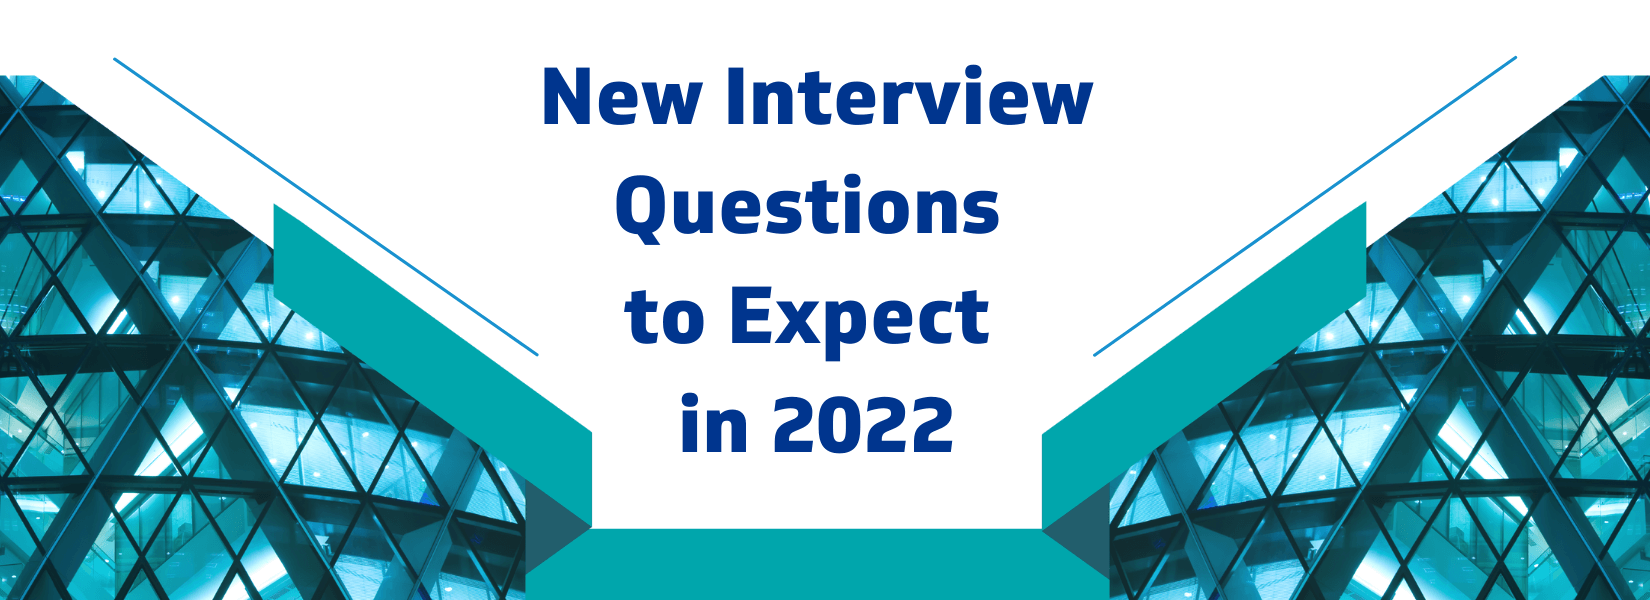 New Interview Questions to Expect in 2022